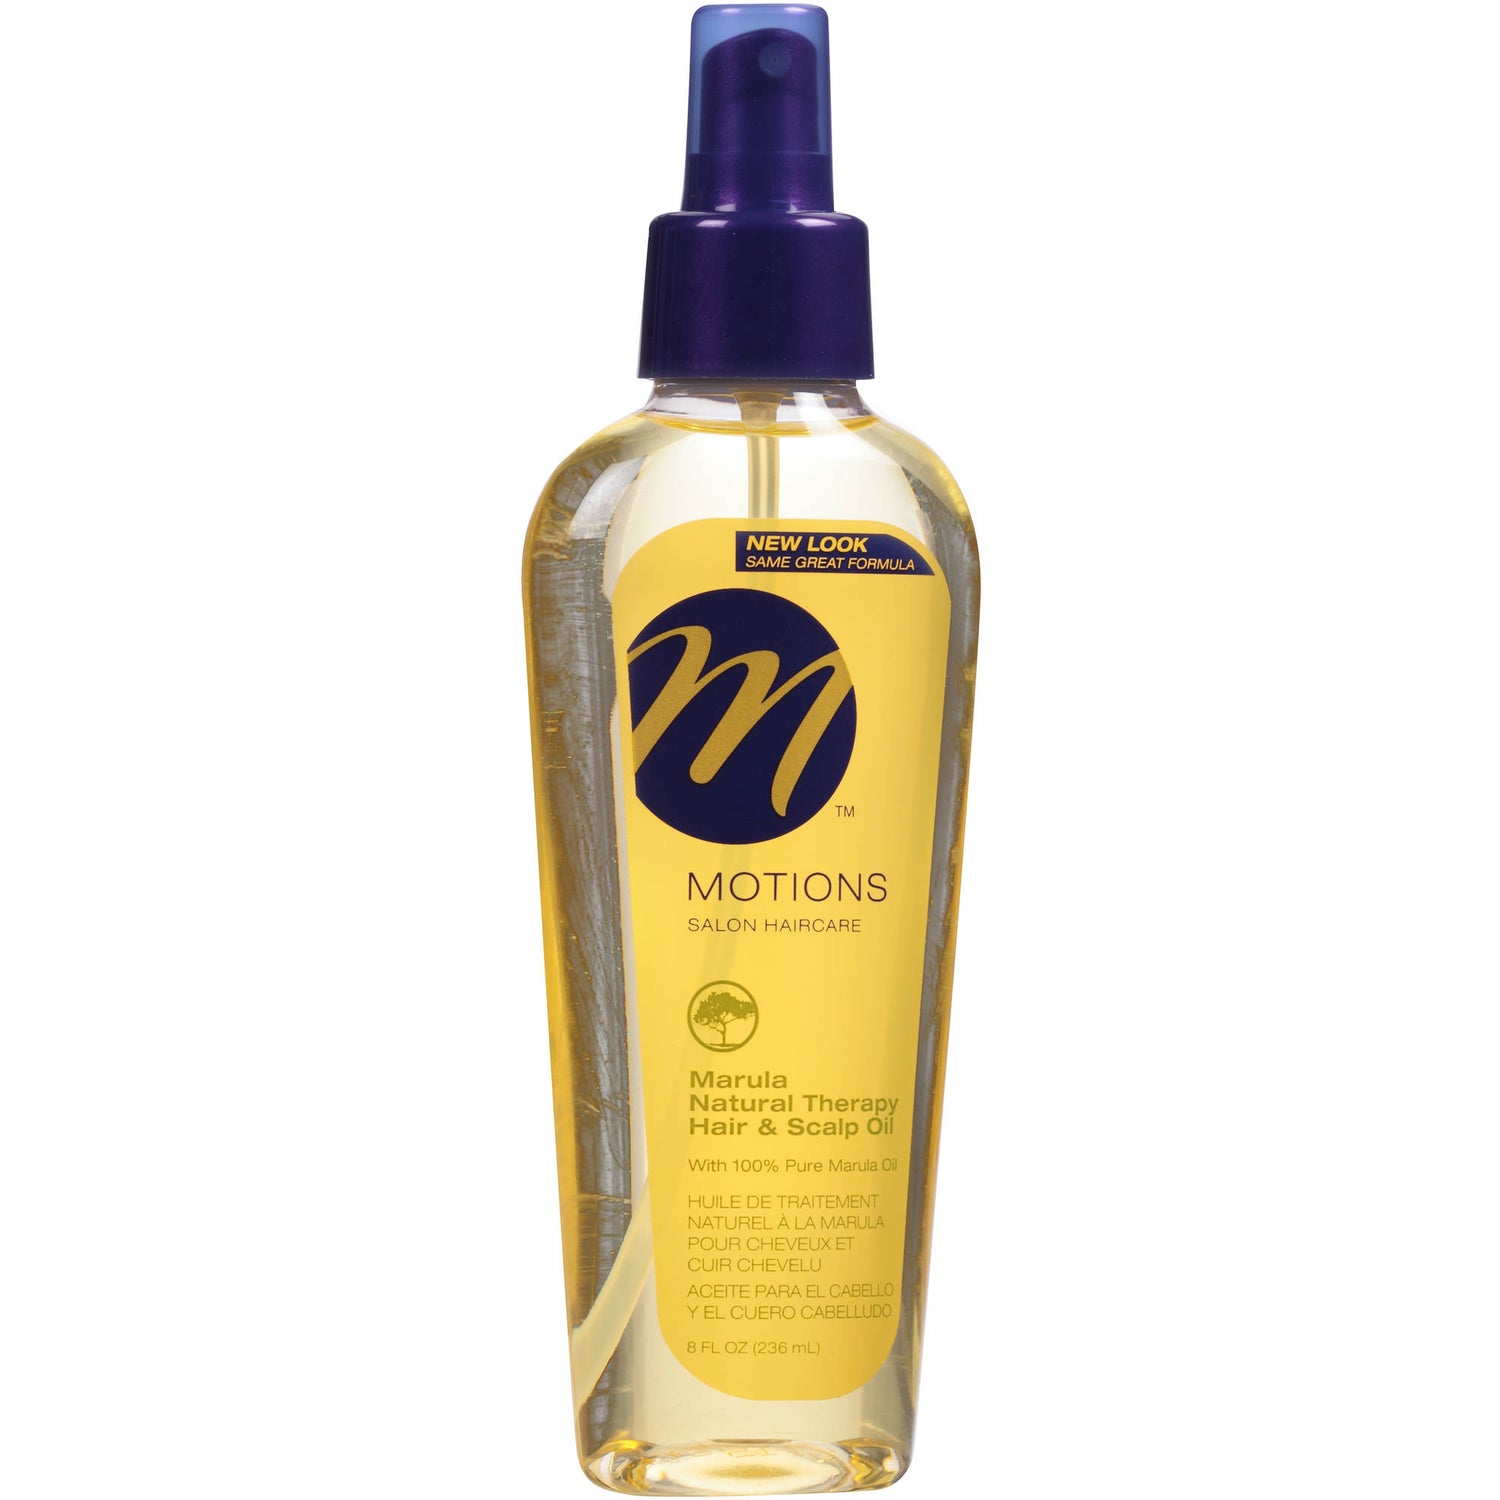 Motions Salon Haircare Marula Natural Therapy Hair And Scalp Oil 8 Oz